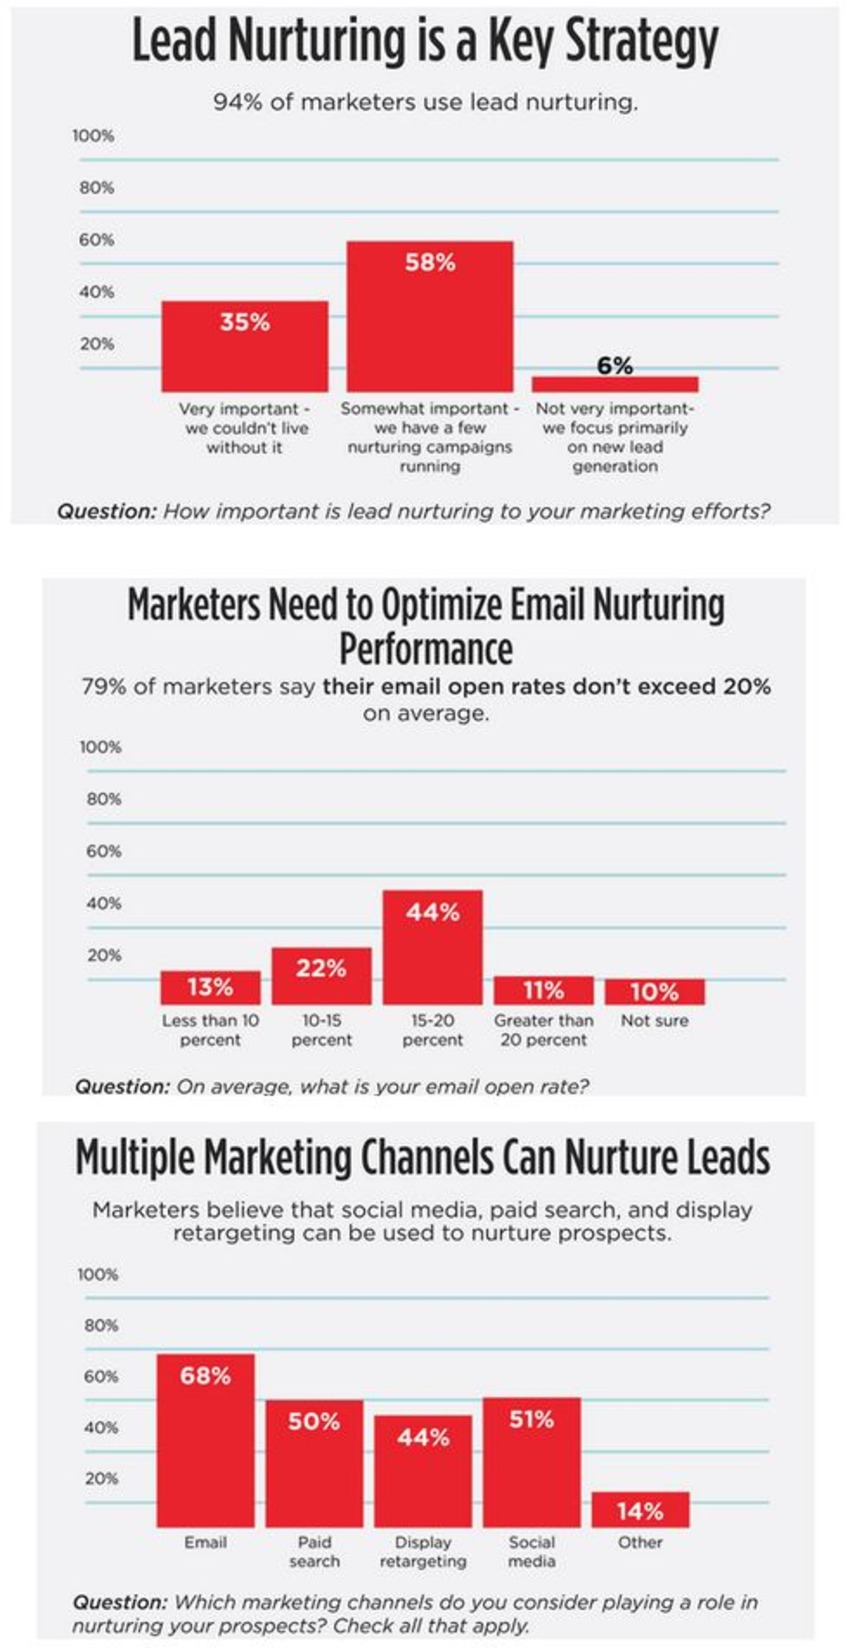 Email Marketers Need to Do More to Nurture Leads [Study] - ClickZ | The MarTech Digest | Scoop.it